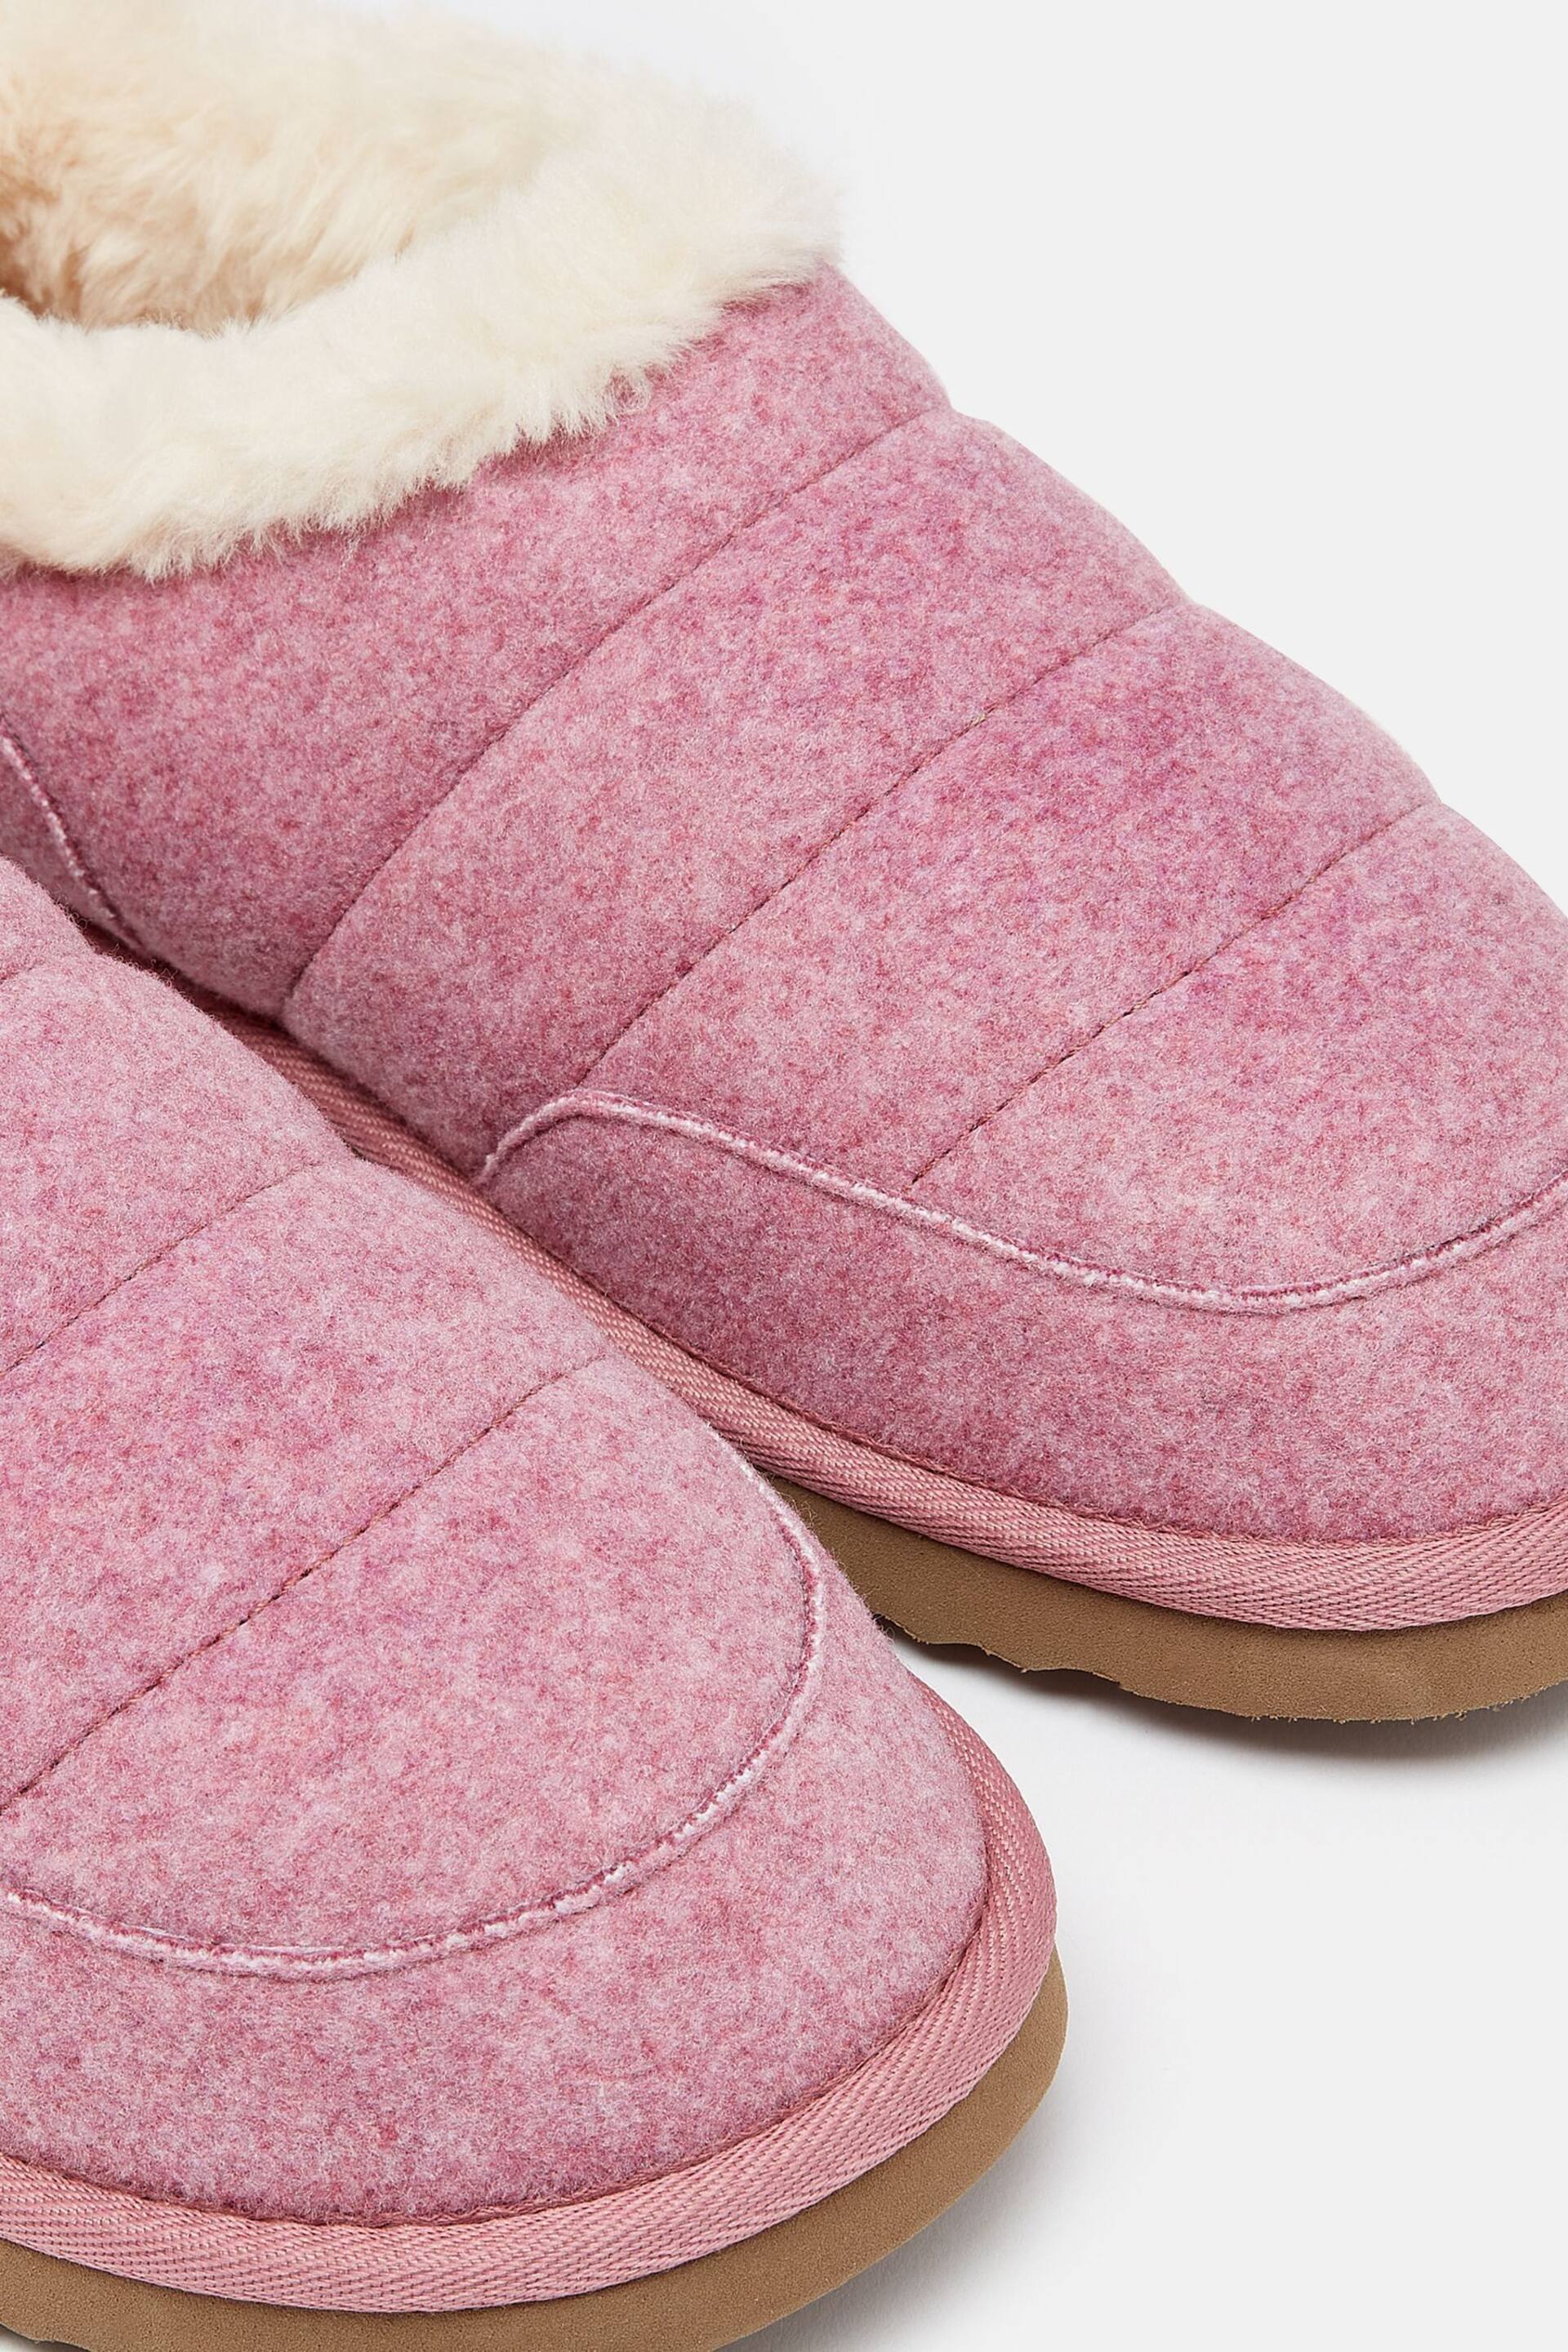 Joules Women's Lazydays Pink Faux Fur Lined Slippers - Image 2 of 5